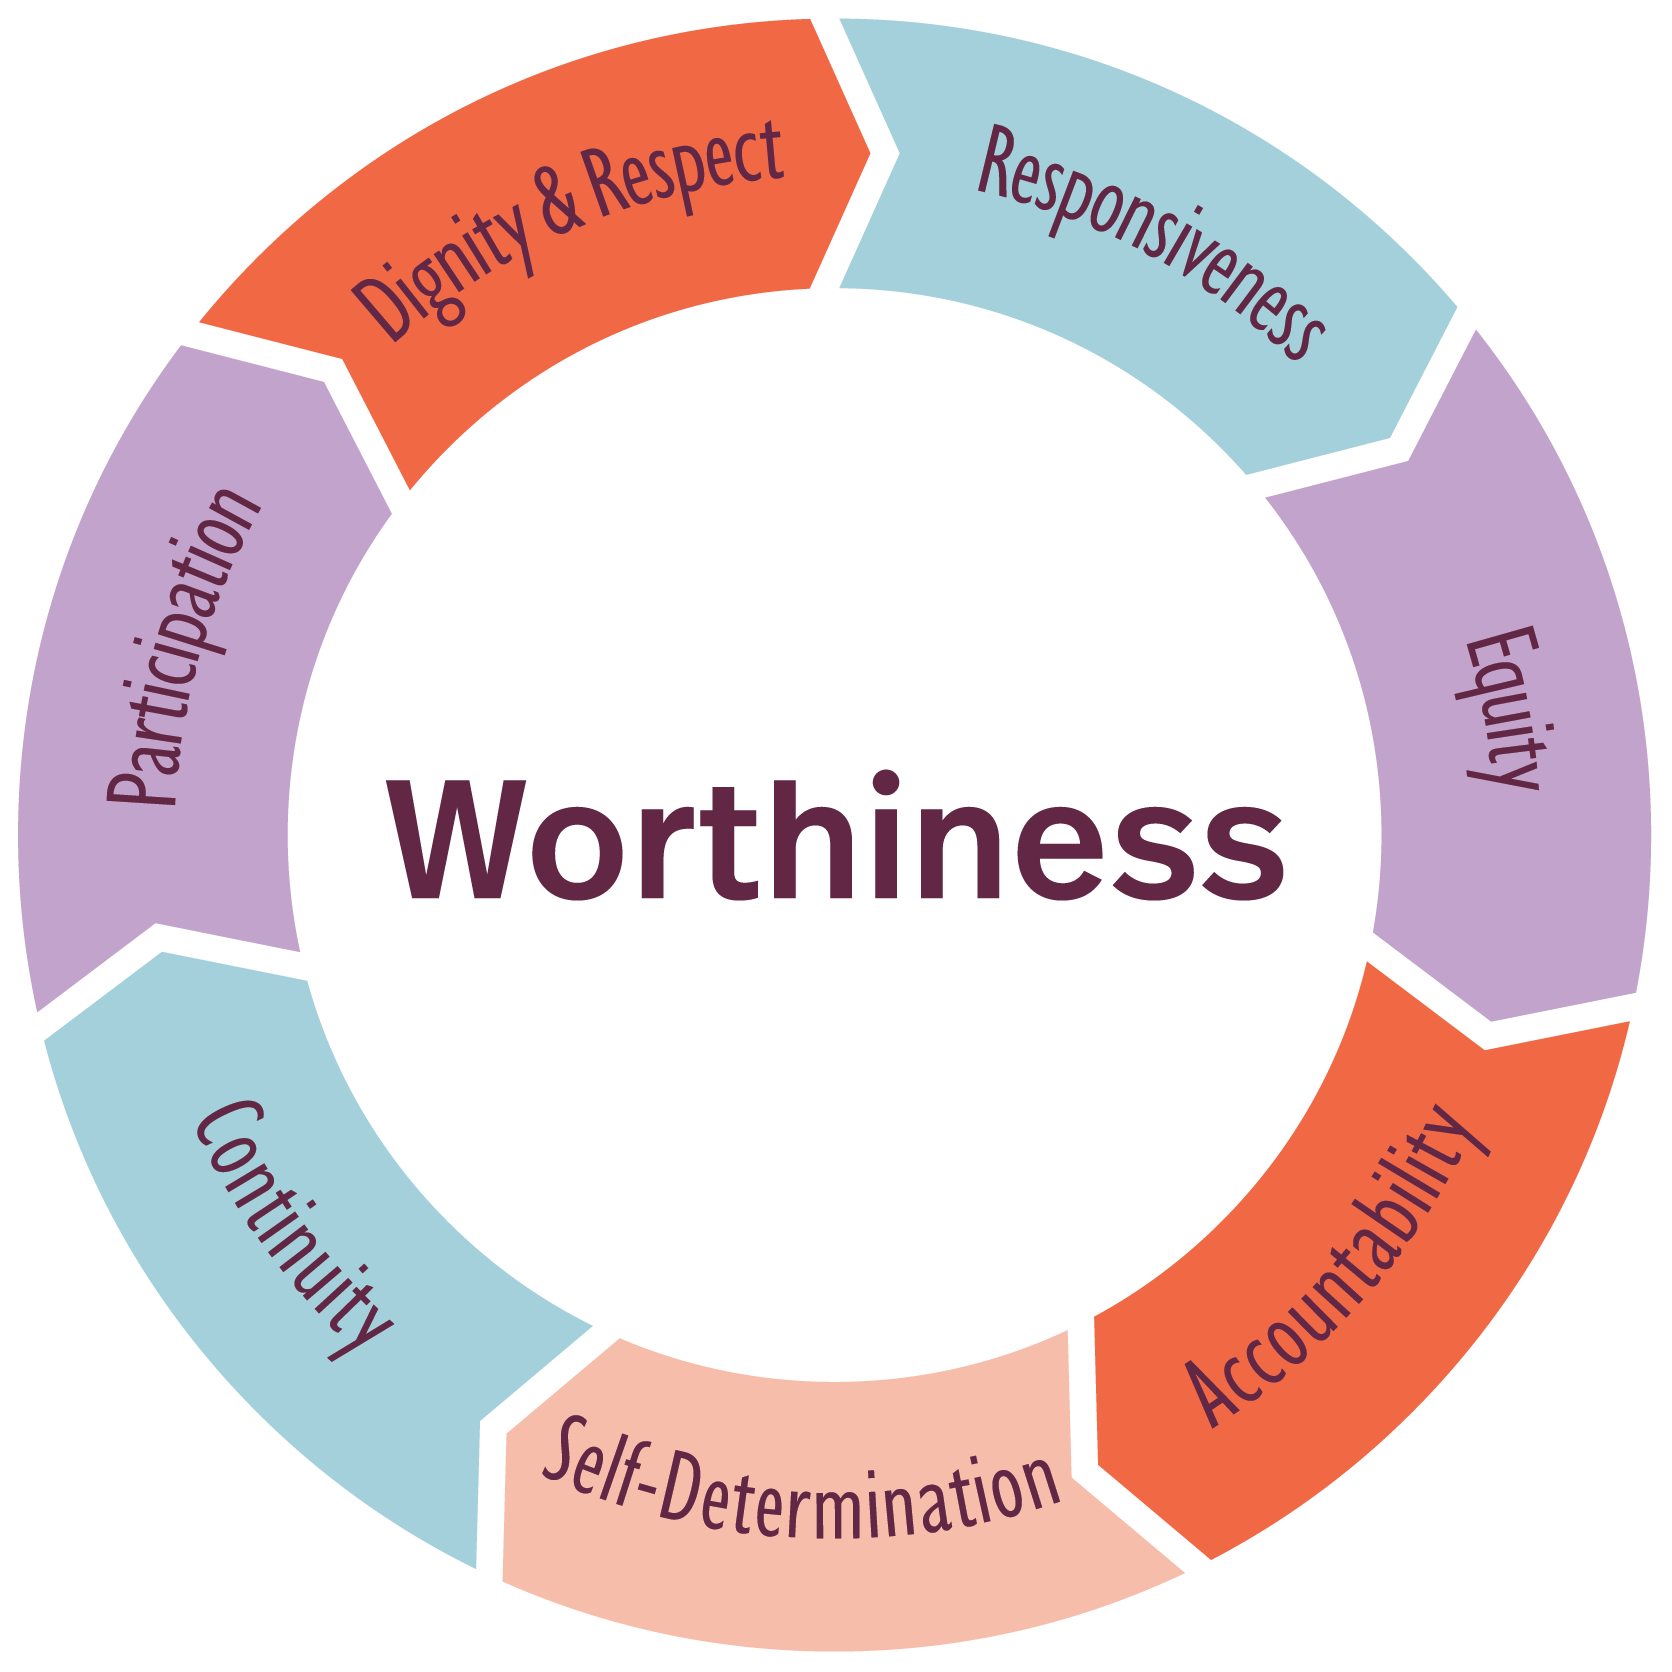 Provide's core values of dignity and respect, responsiveness, equity, accountability, self-determination, continuity, and participation are centered around worthiness